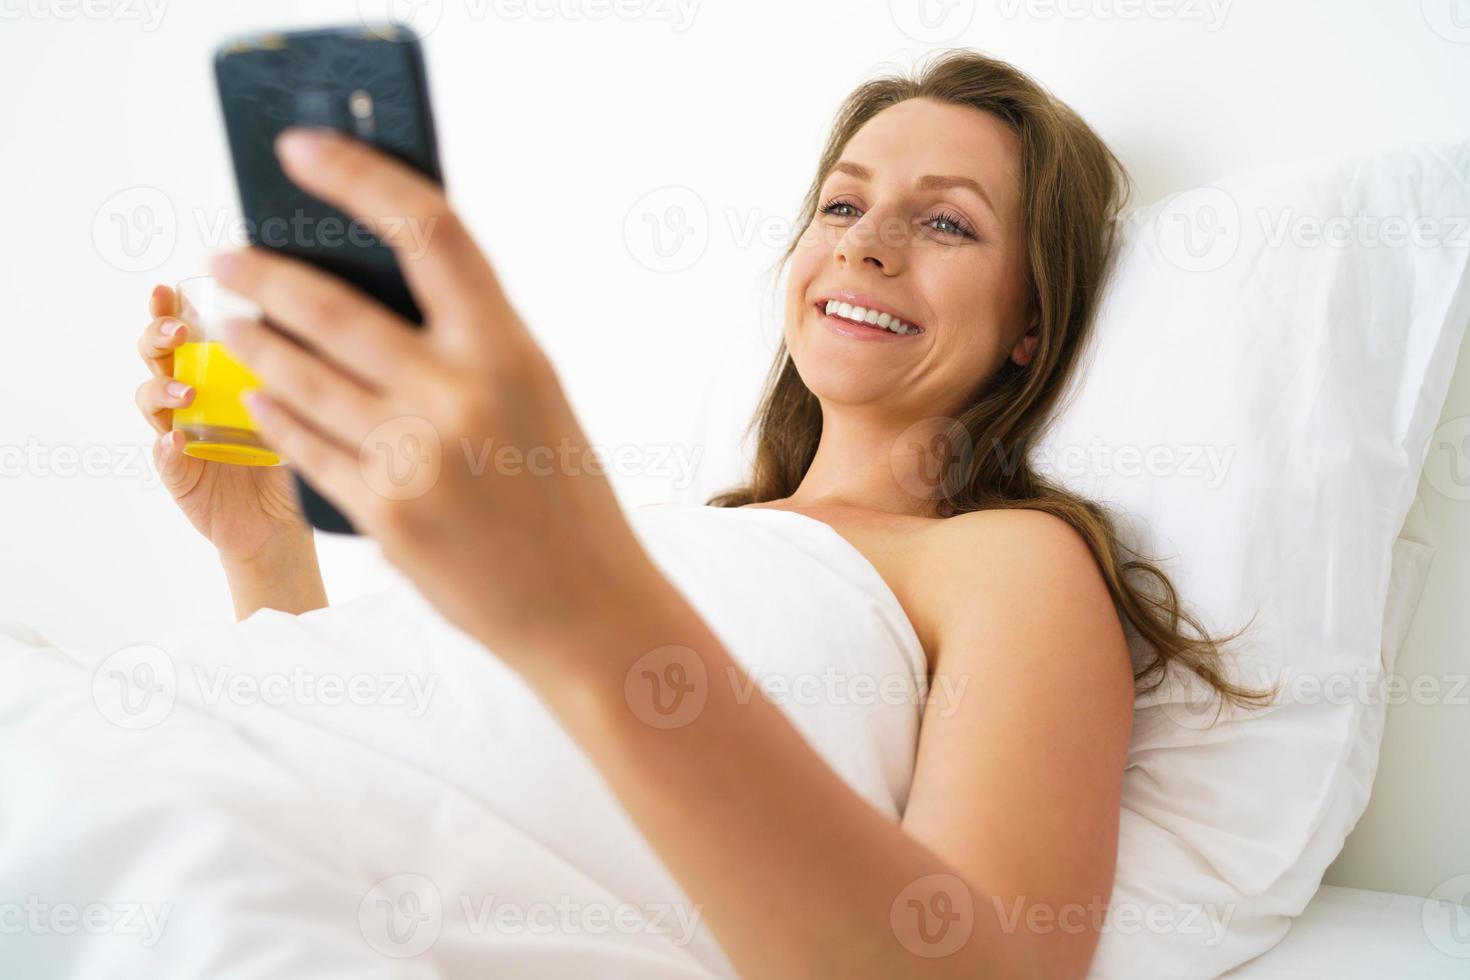 Cute woman checks the smartphone and drinks orange juice in bed in the morning photo